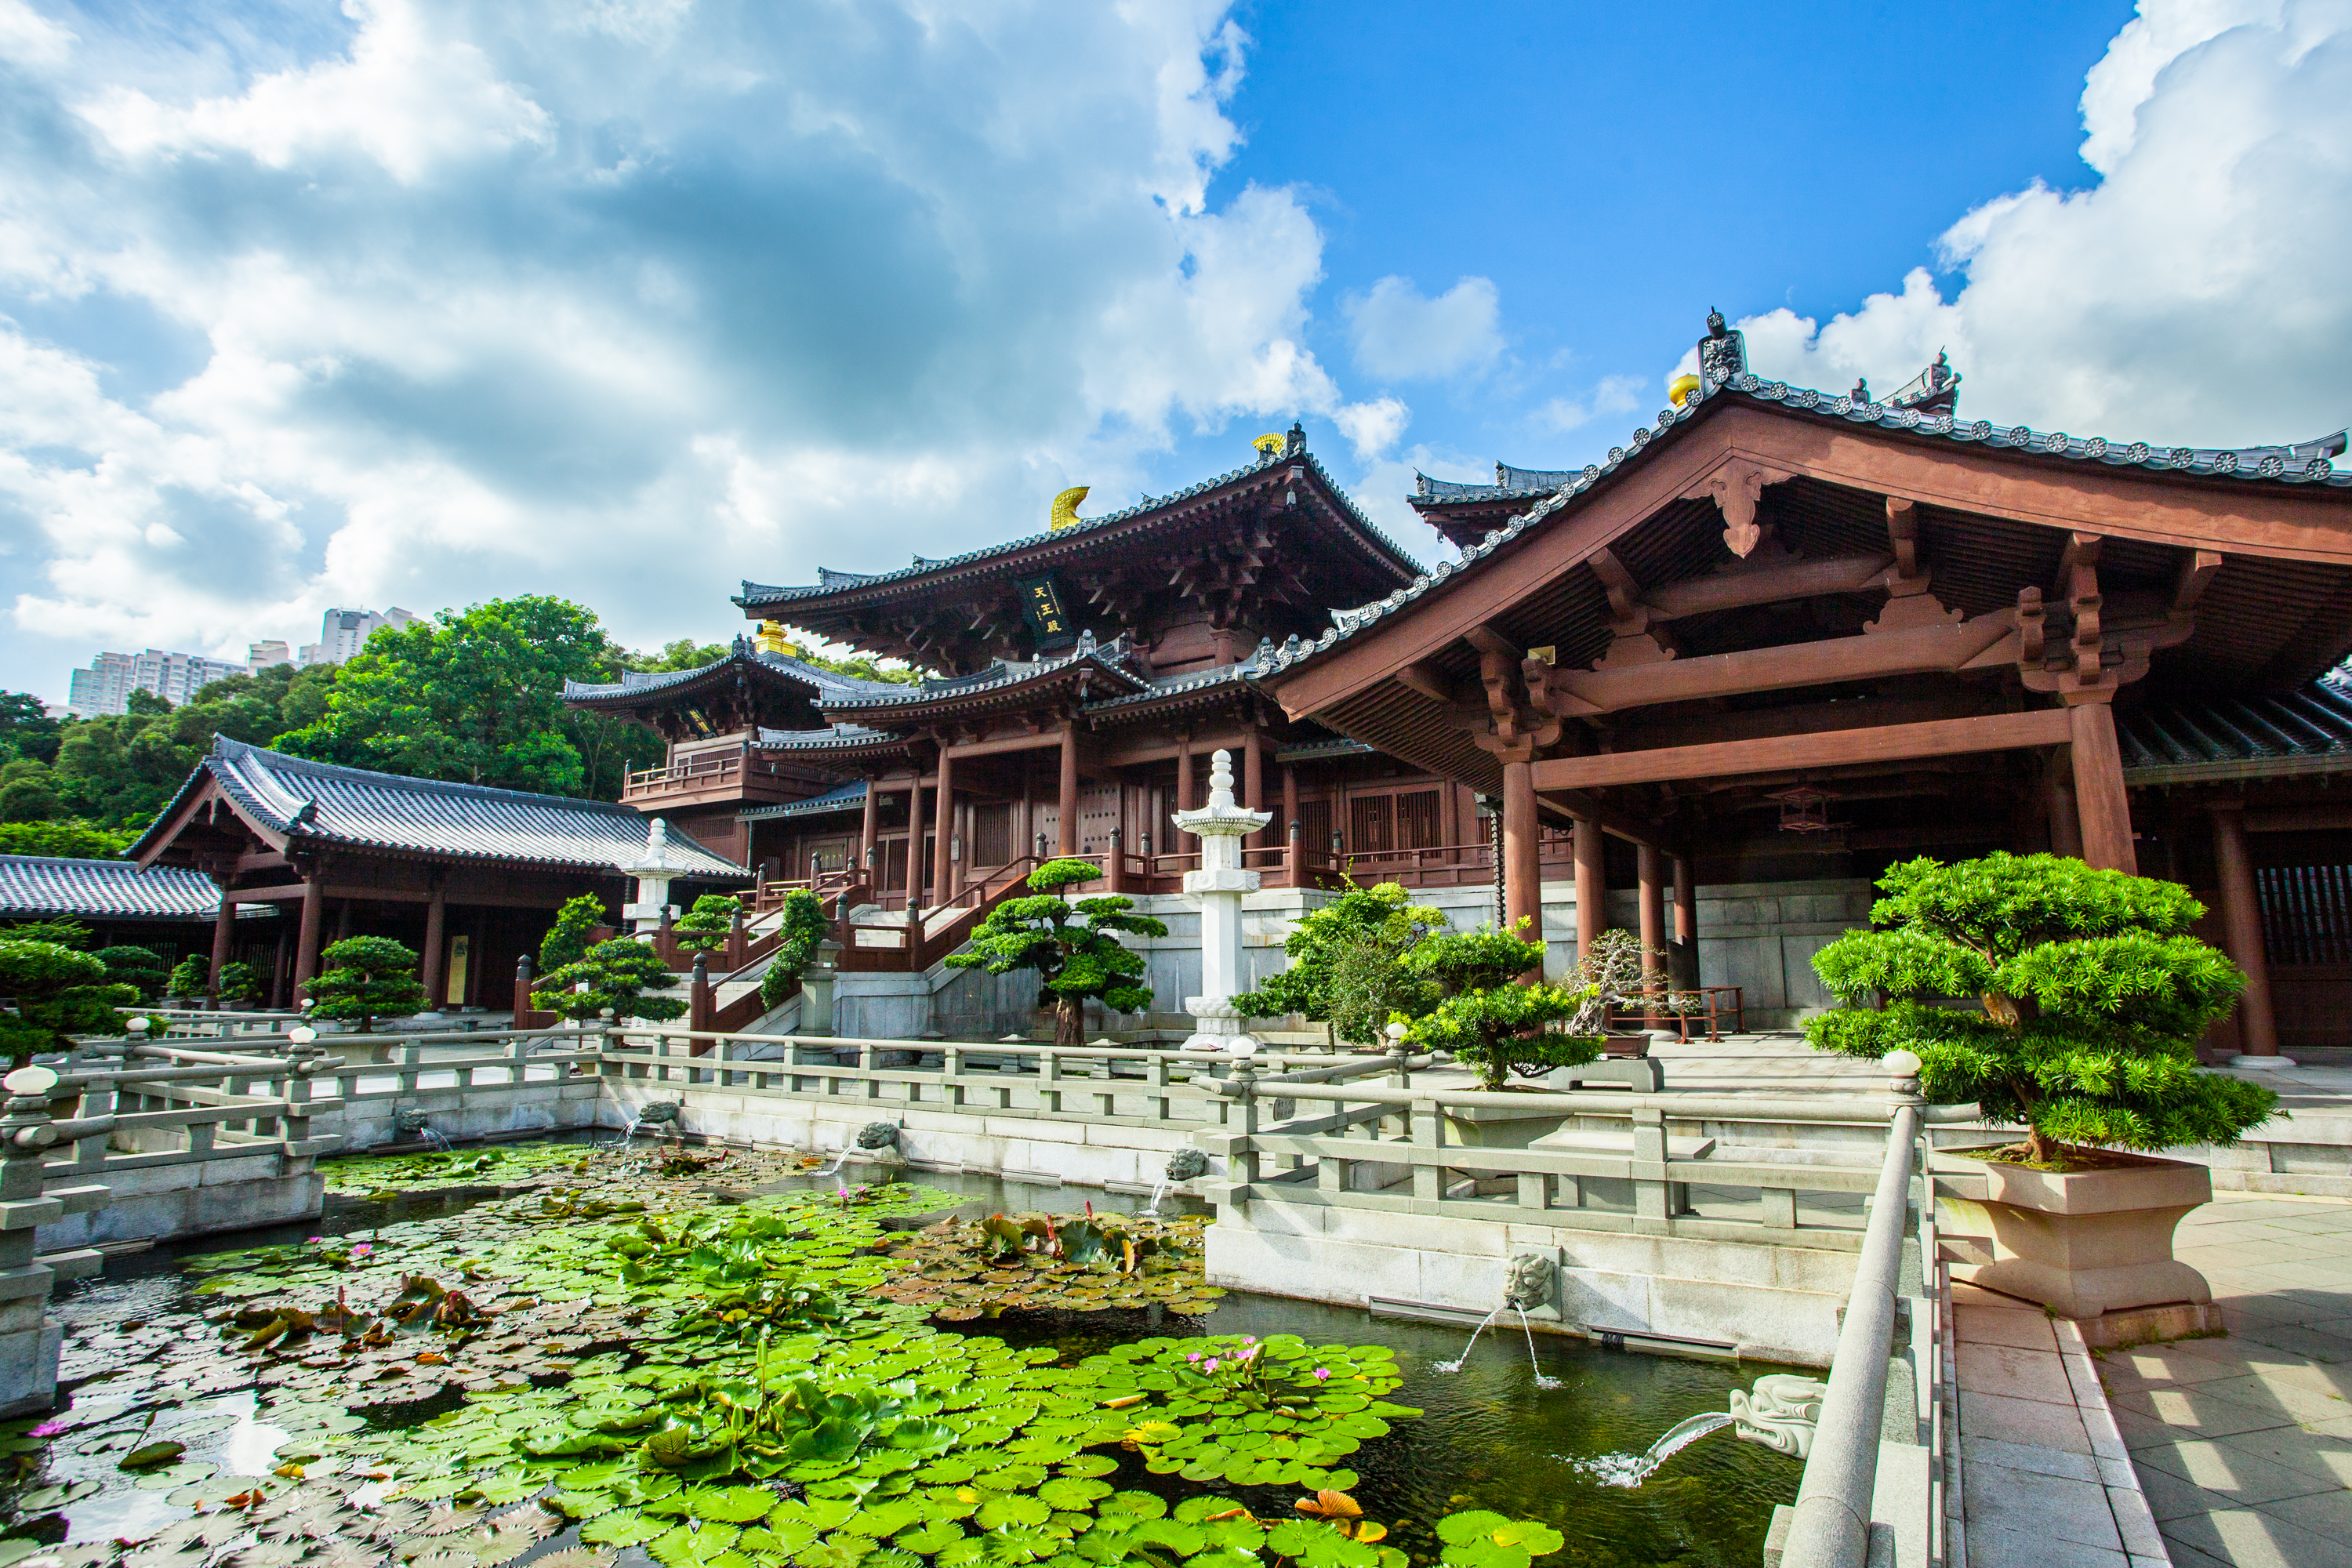 Traditional Asian temple with multiple roofs and a pond with lily pads in the foreground